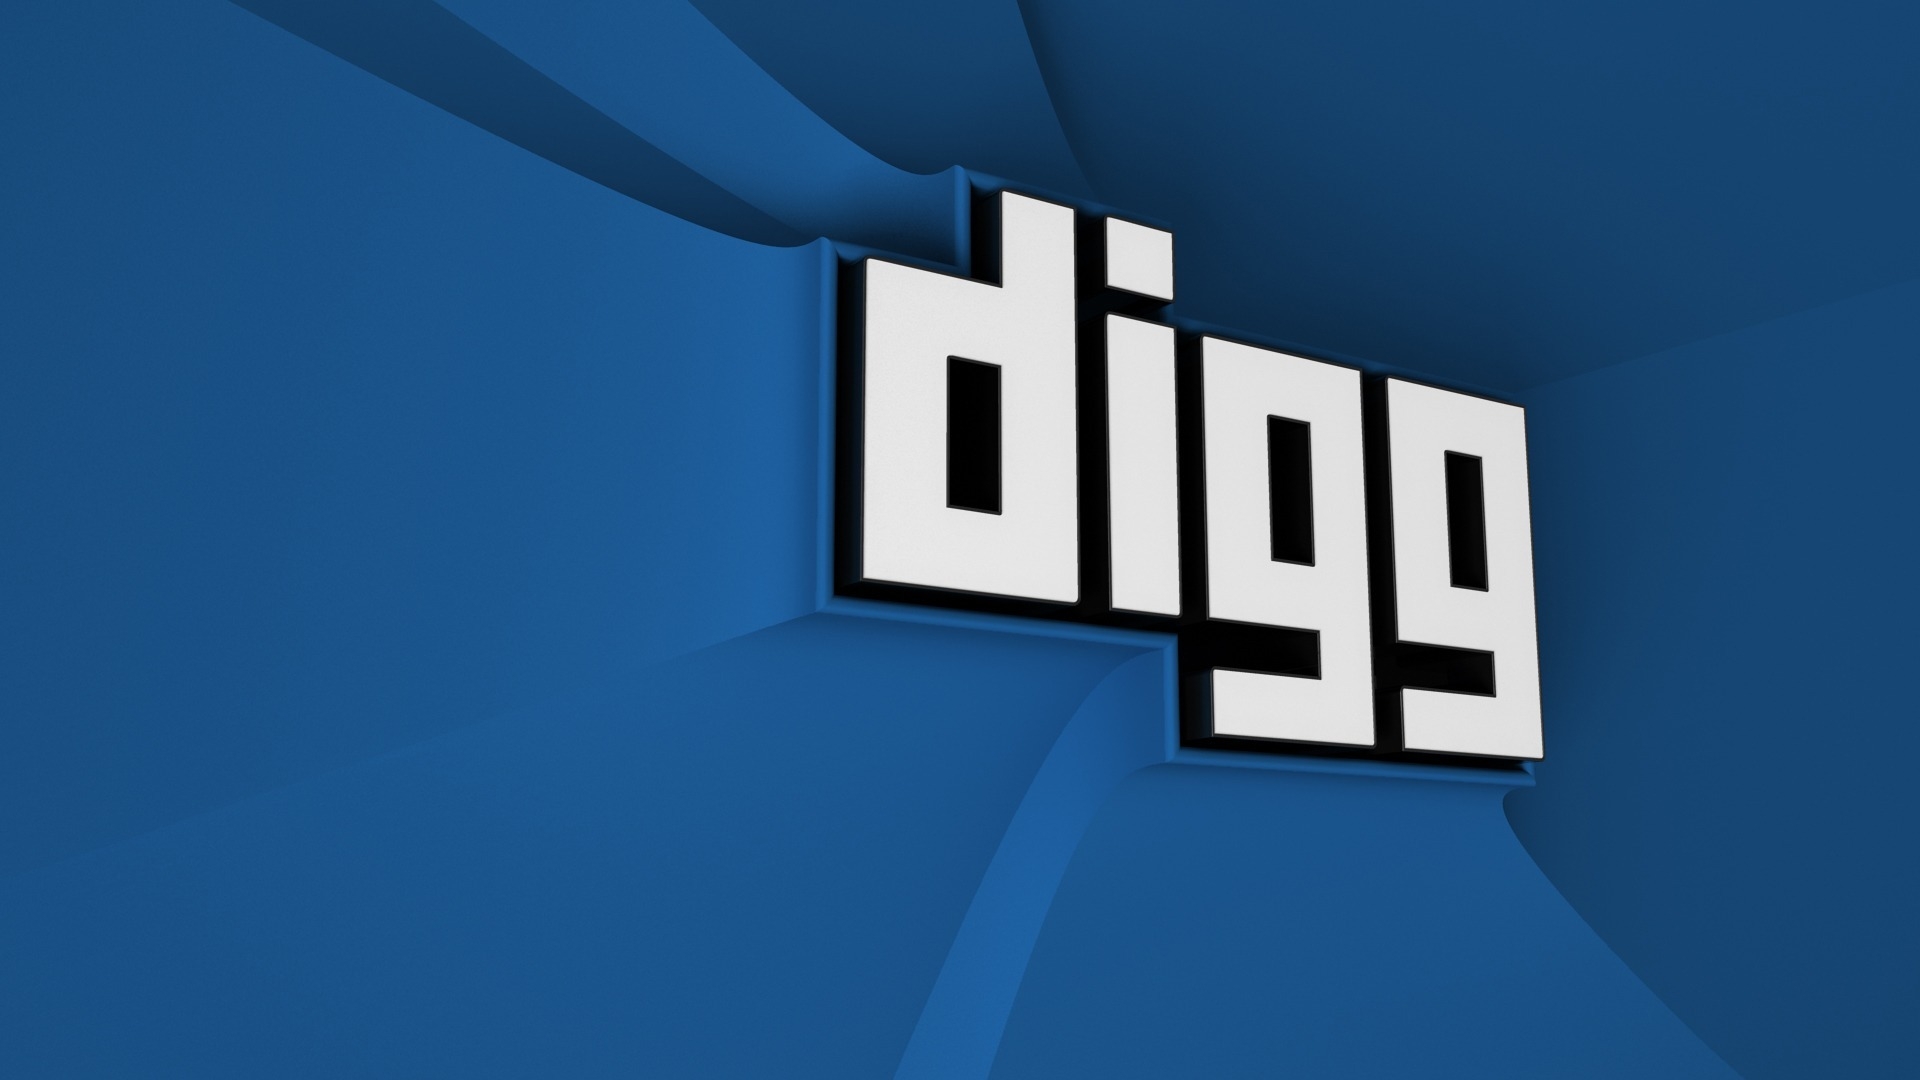 Digg for 1920 x 1080 HDTV 1080p resolution